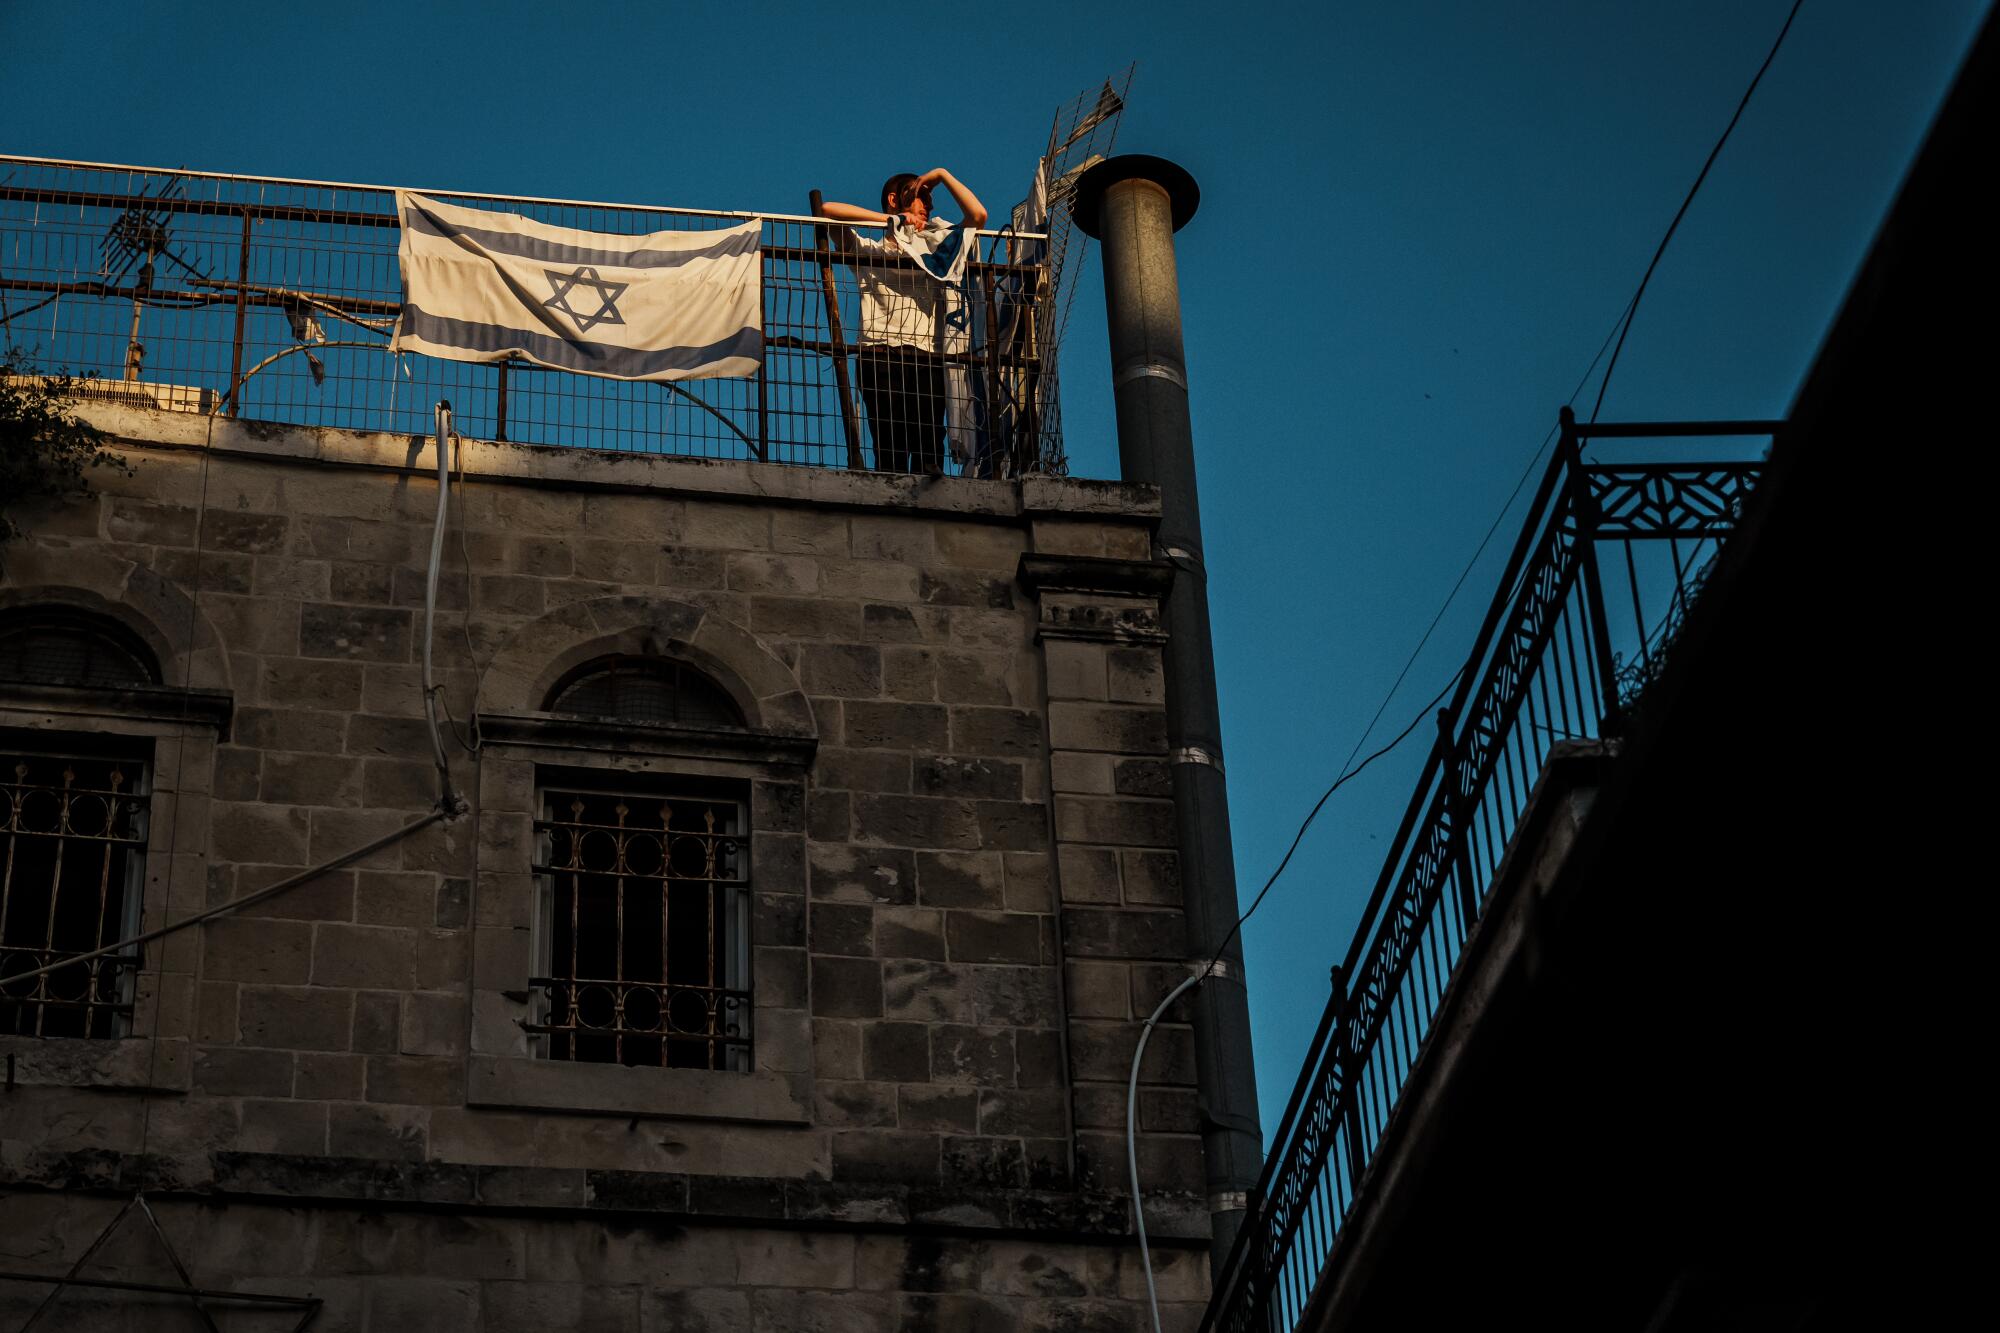 A man on a rooftop next to an Israel flag